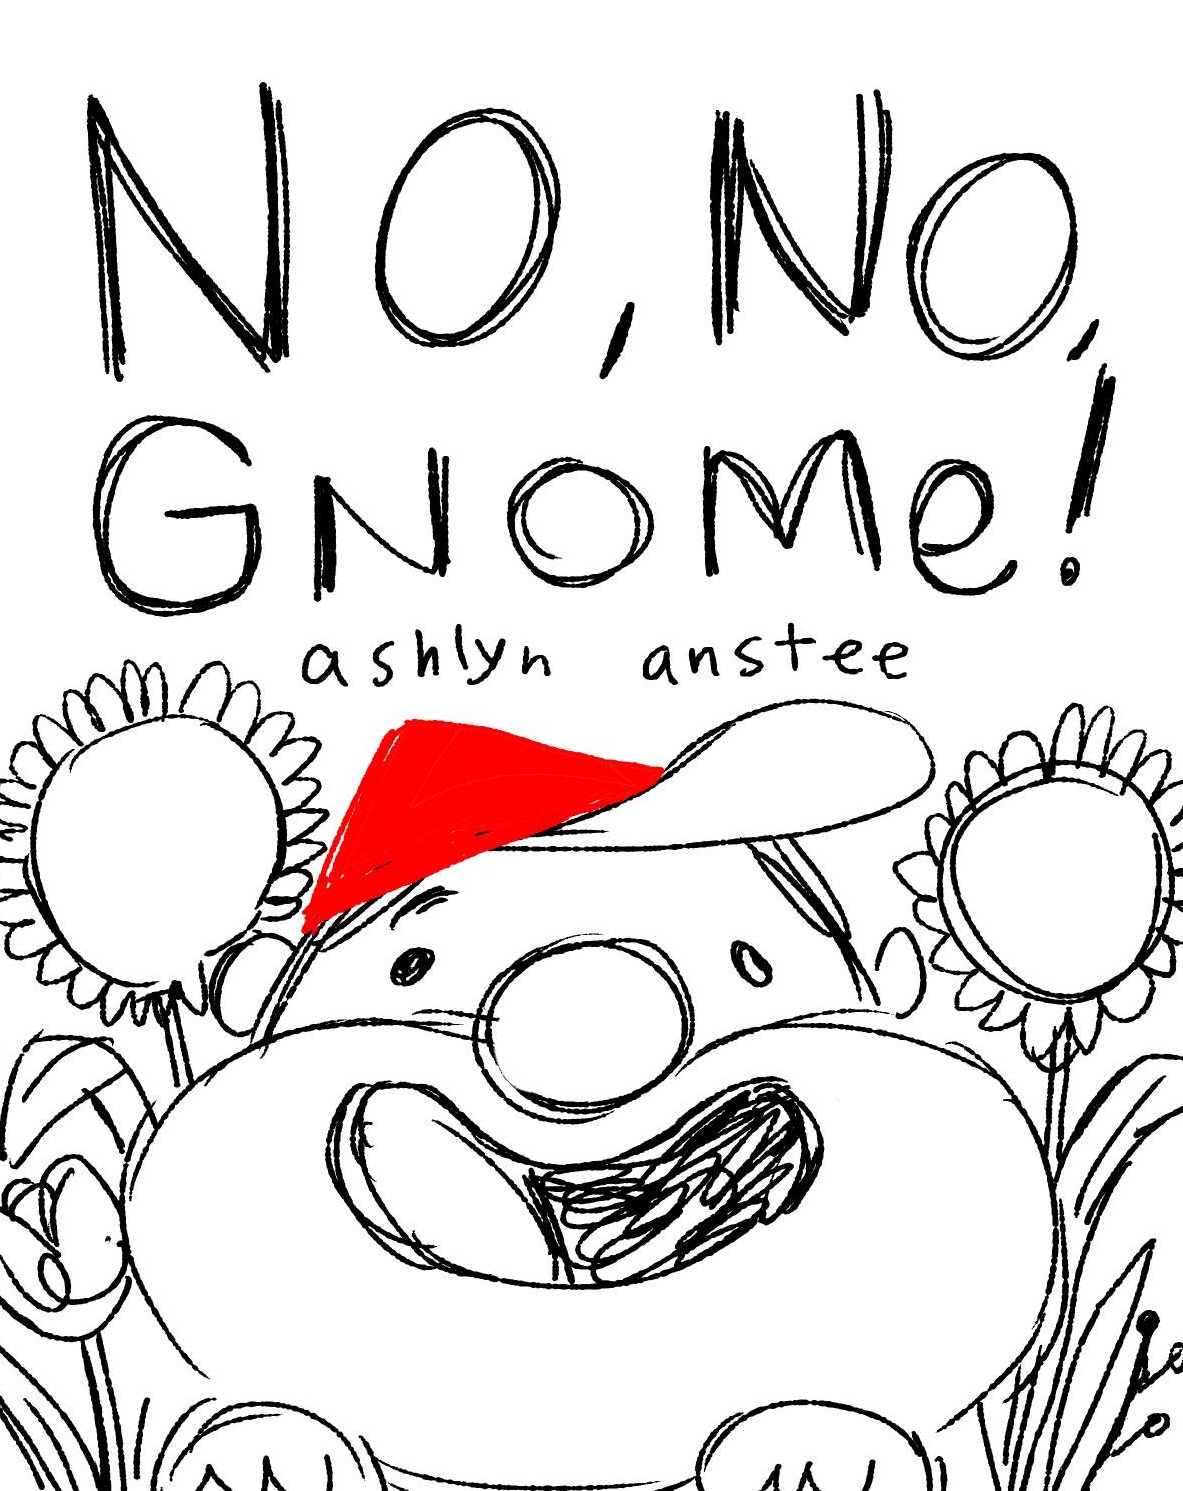 gnomecoversketches 2.jpg